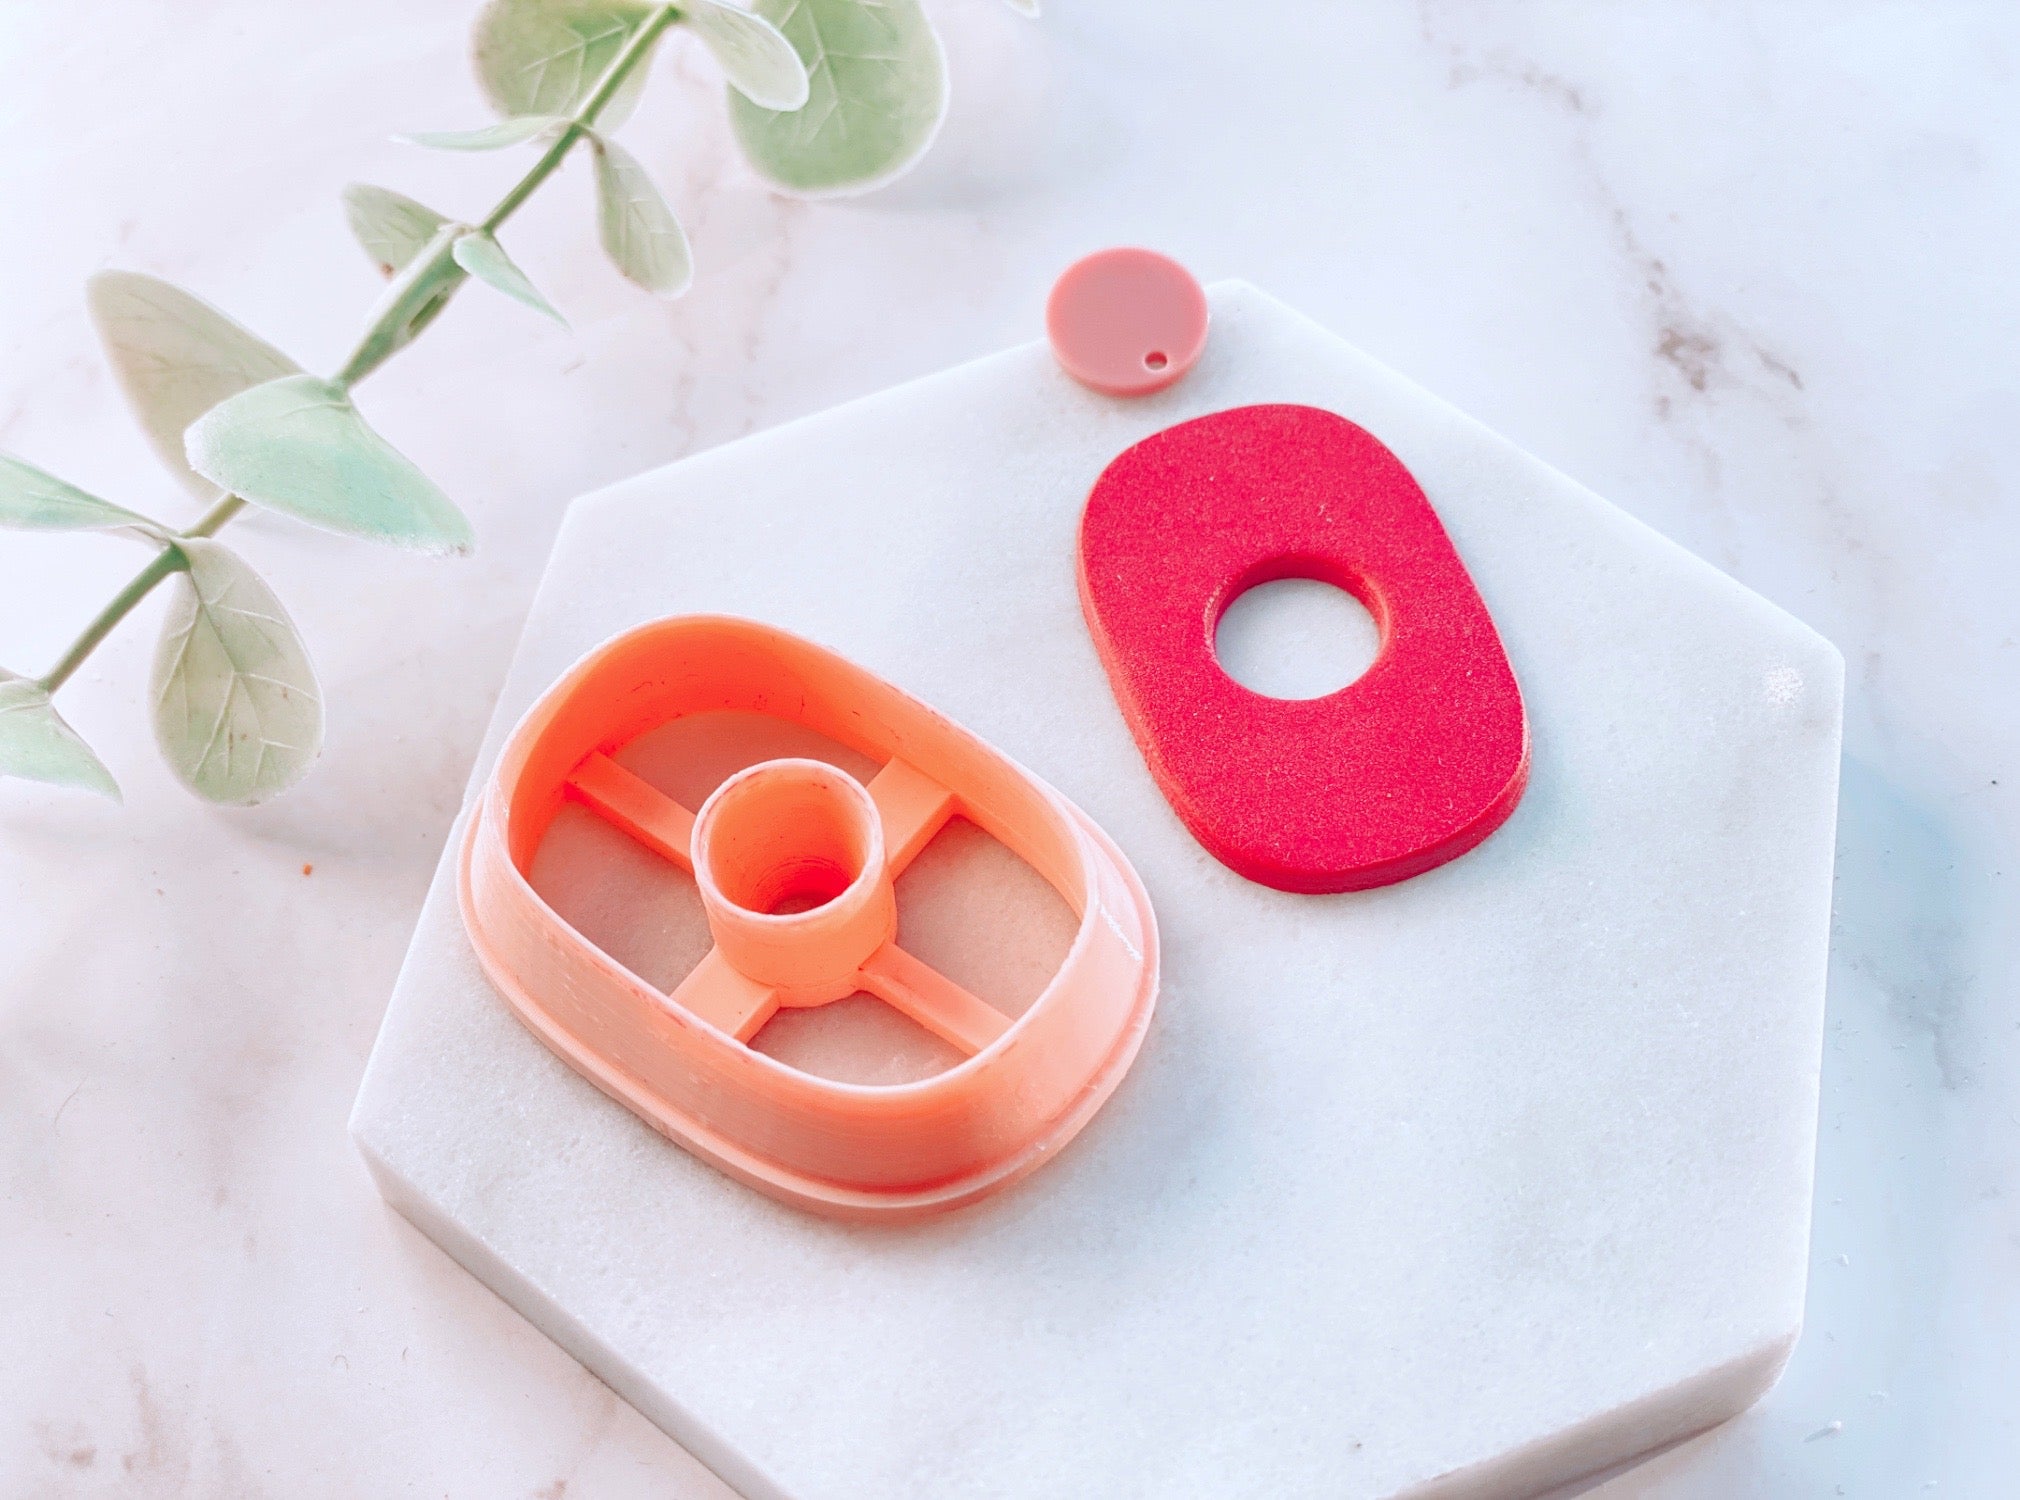 Narrow Curvy Square Donut Shaped Polymer Clay Cutter | Fondant Cutter | Cookie Cutter in Round Centre Accent